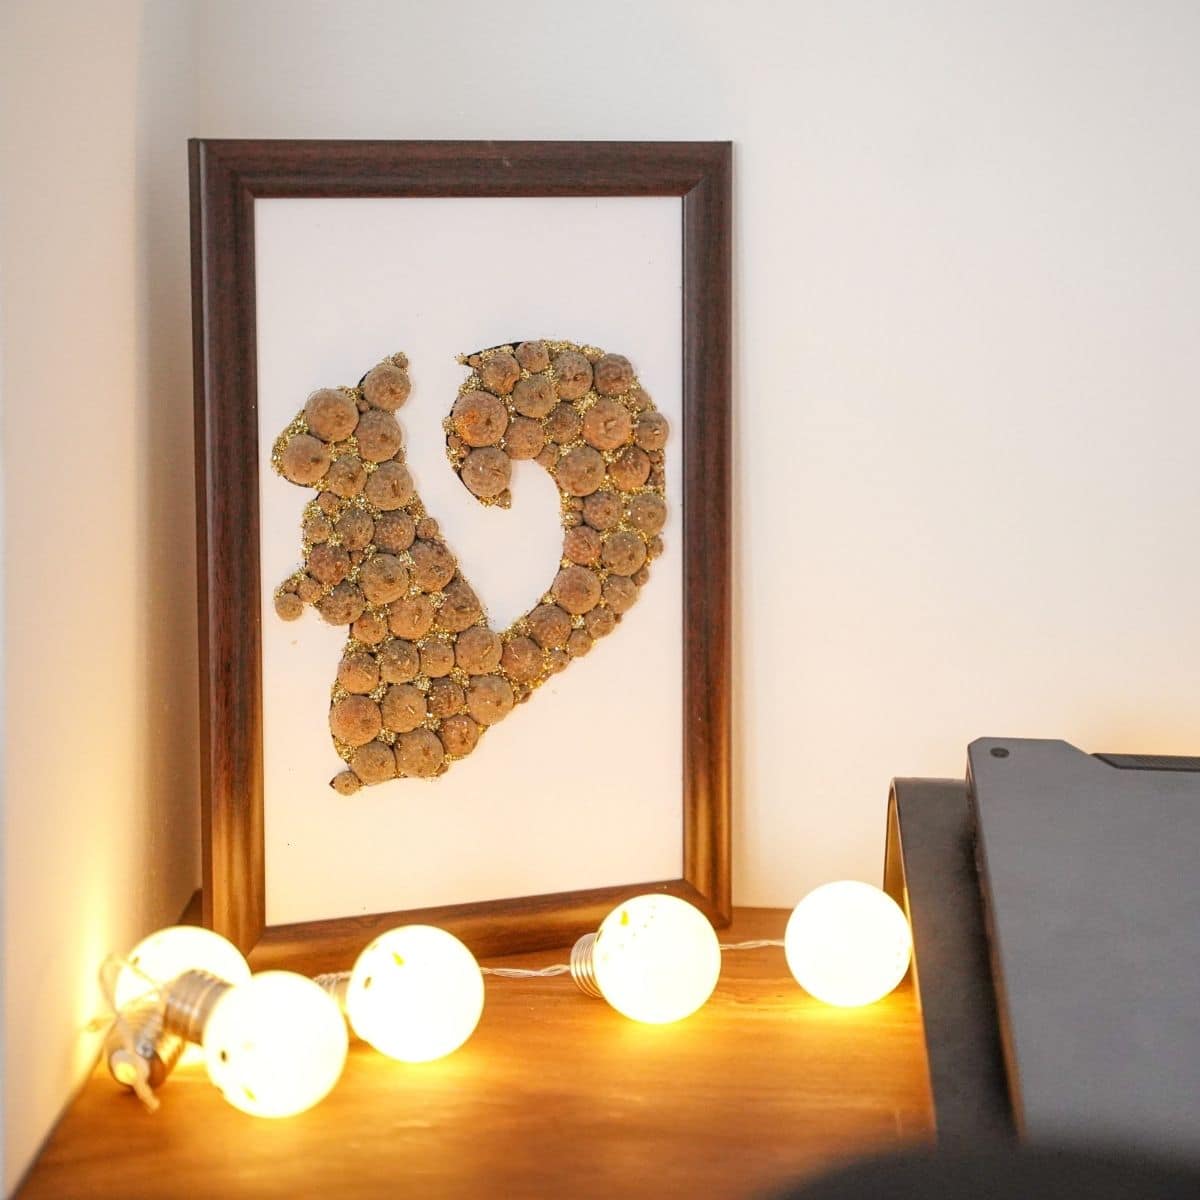 Squirrel wall art behind white lights against wall